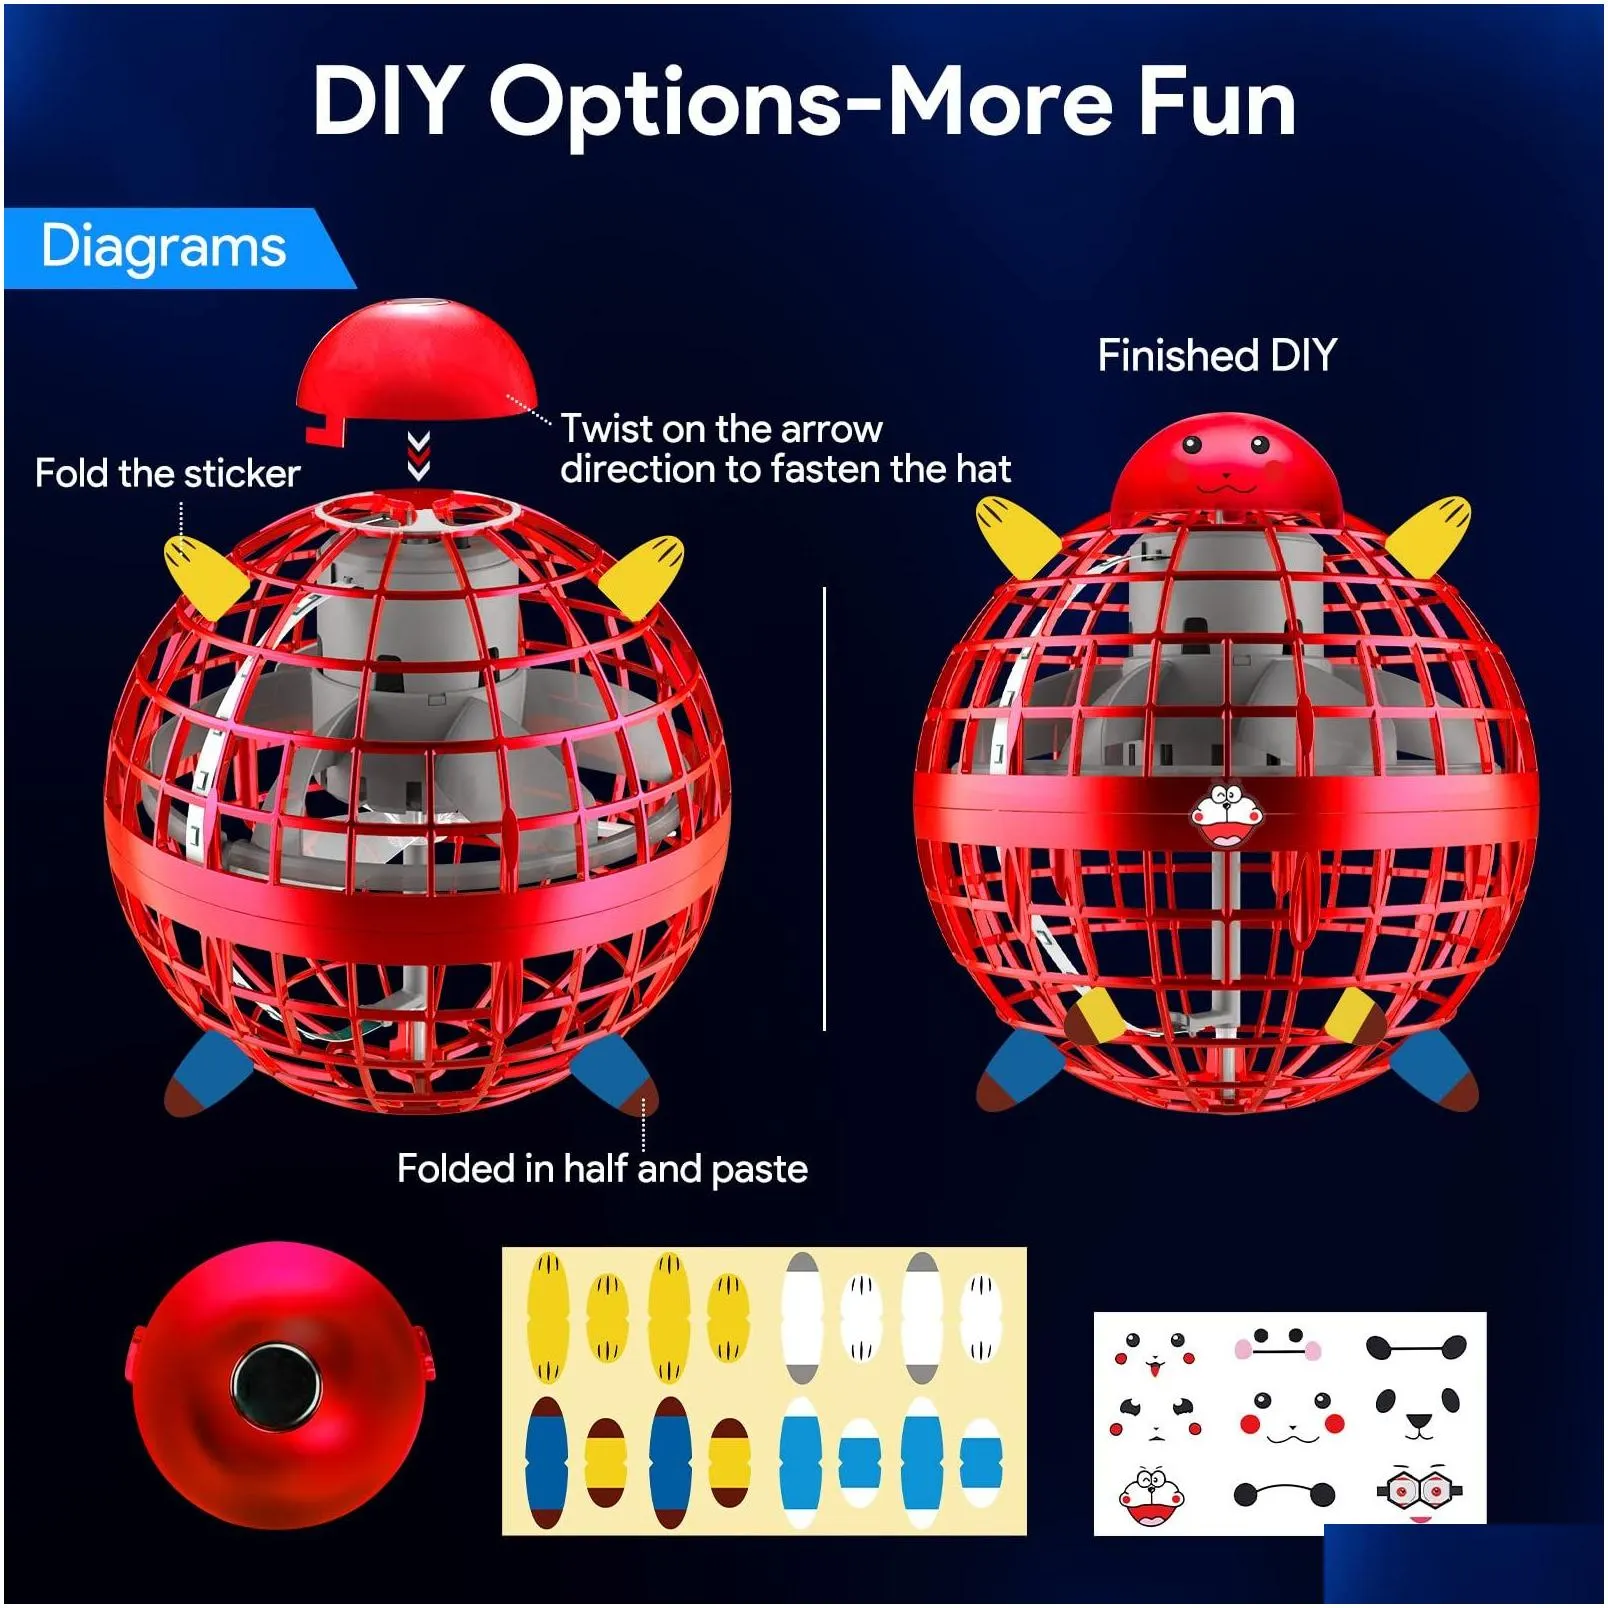 Magic Balls Flying Orb Ball Toy With Light 2022 Upgraded Hover Hand Controlled Spinner Mini Drone Boomerang Birthday Gift For 6 7 8